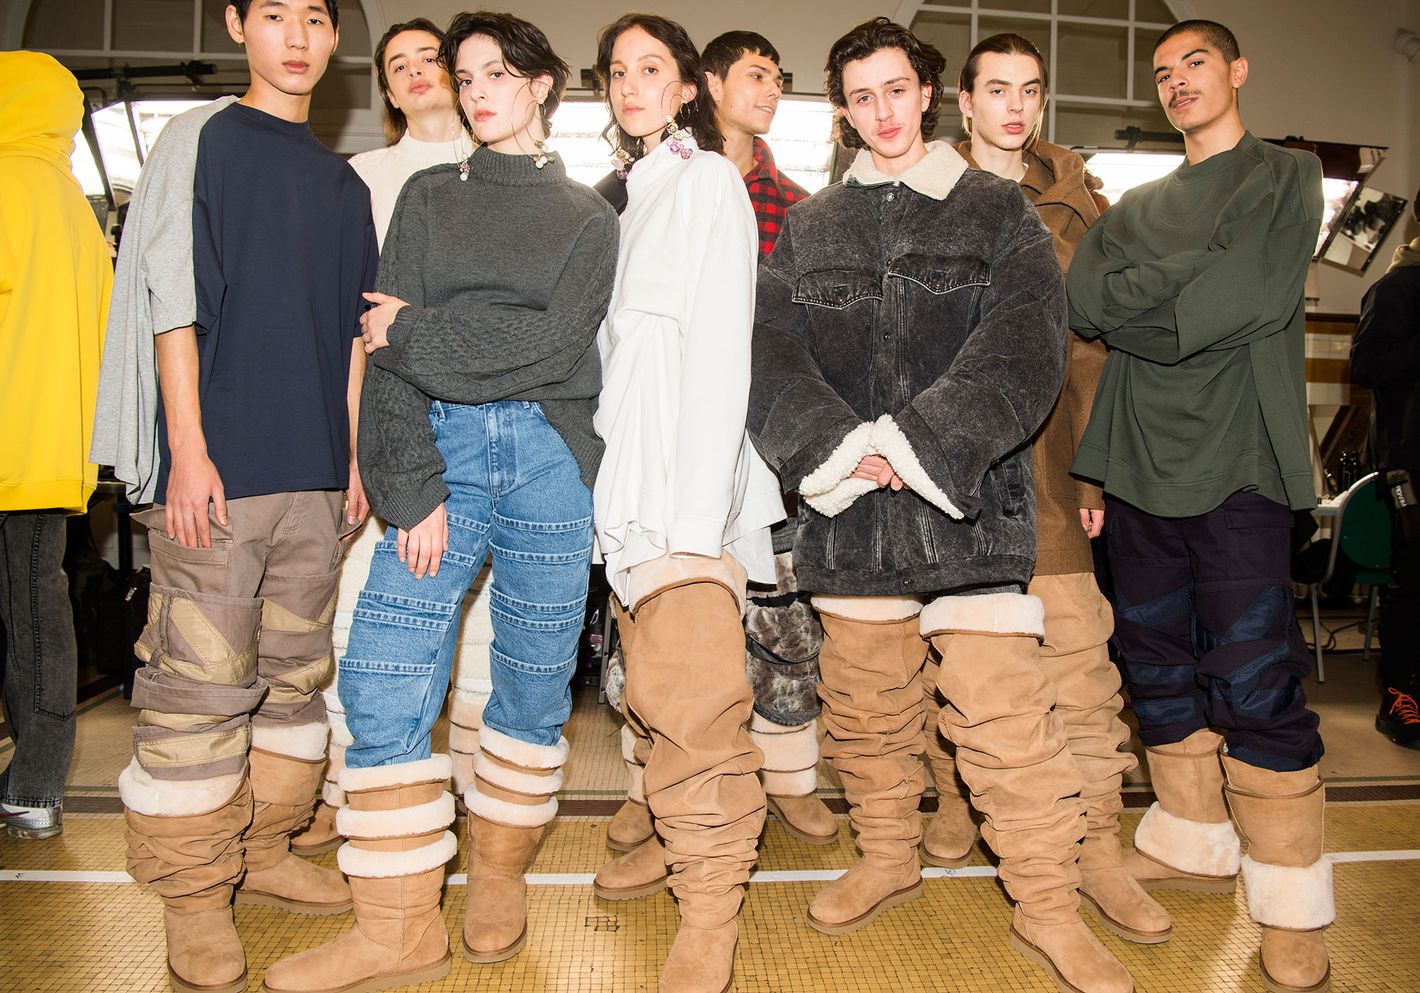 How Uggs became the celebrity fashion trend that will never die